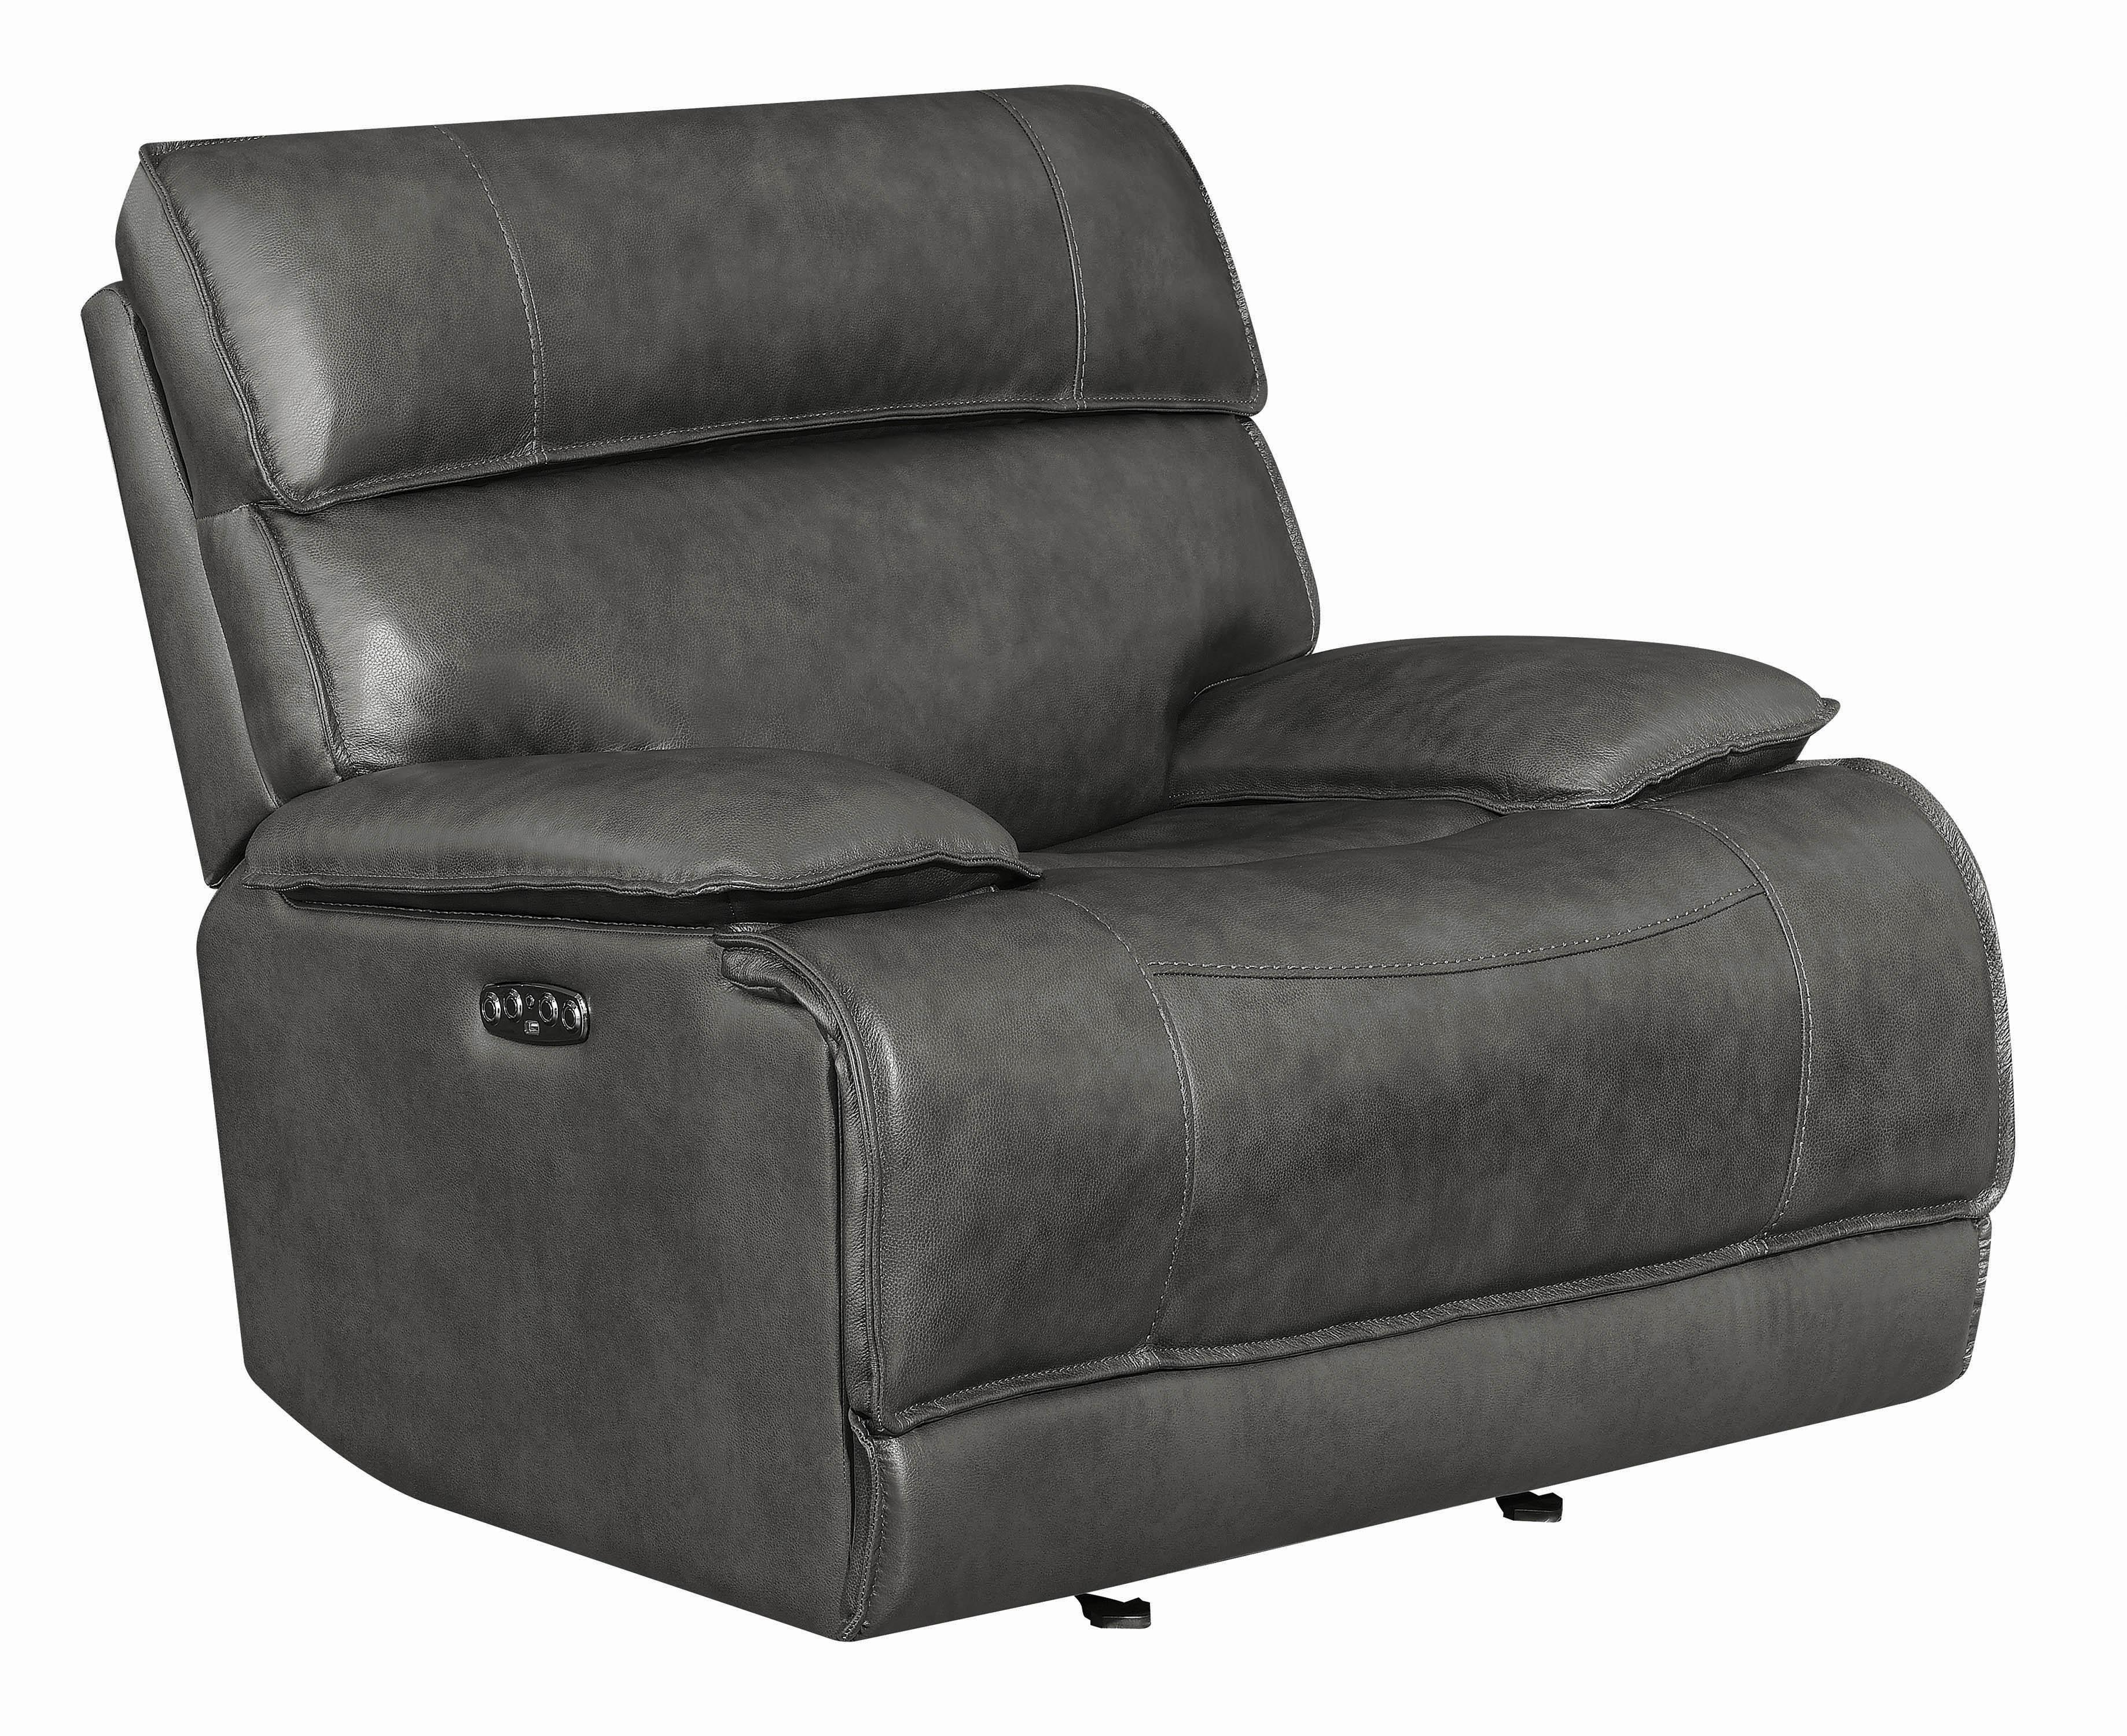 Modern Power2 glider recliner Stanford 650223PP in Gray Leather